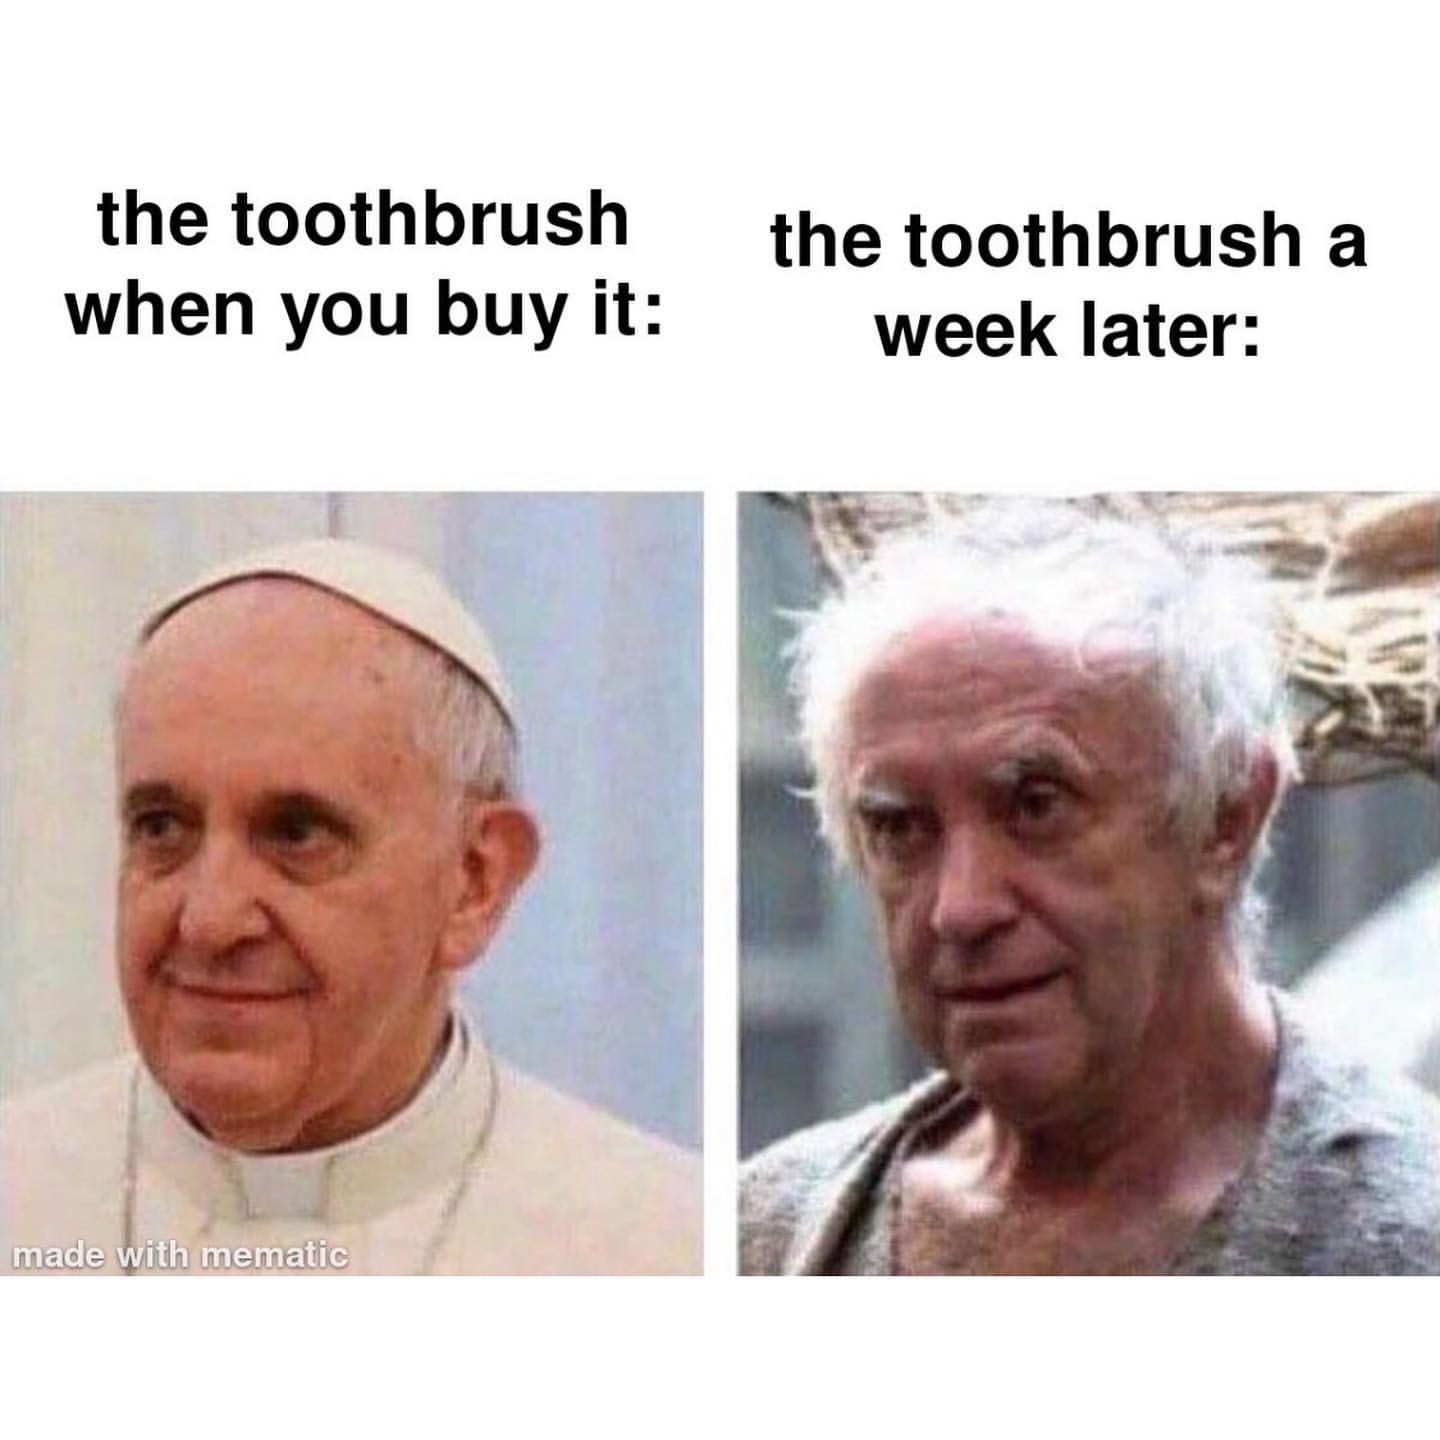 The toothbrush when you buy it: The toothbrush a week later: